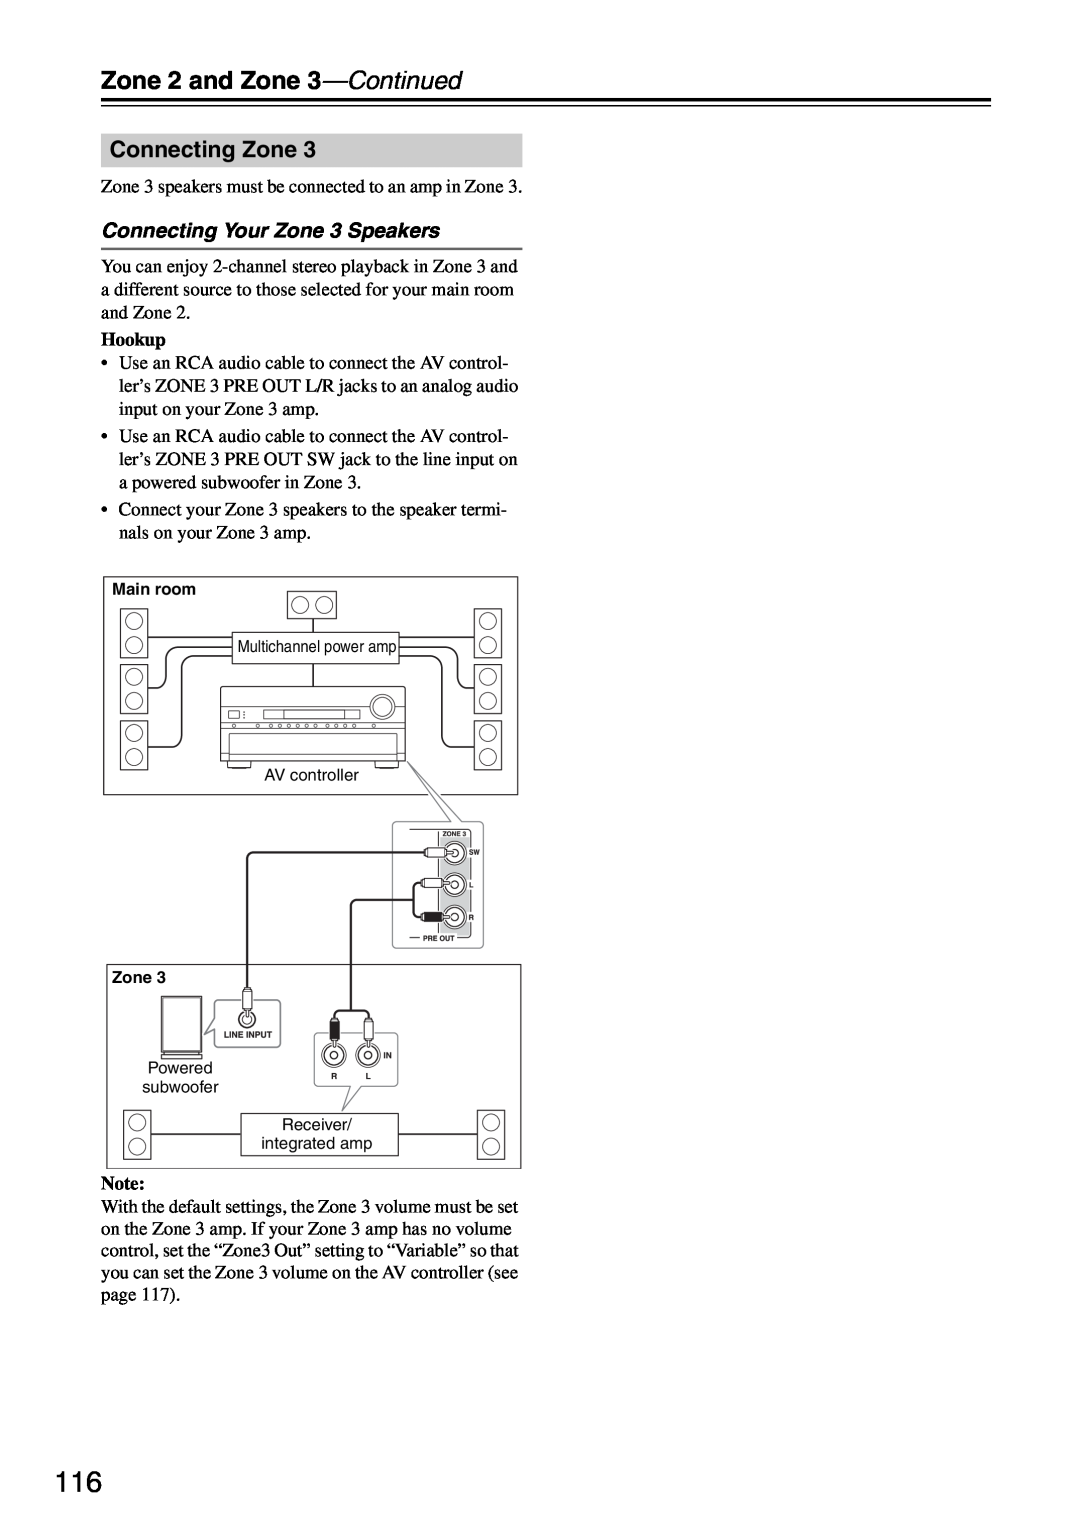 Onkyo PR-SC886 instruction manual Zone 2 and Zone 3—Continued, Connecting Your Zone 3 Speakers, Connecting Zone, Hookup 